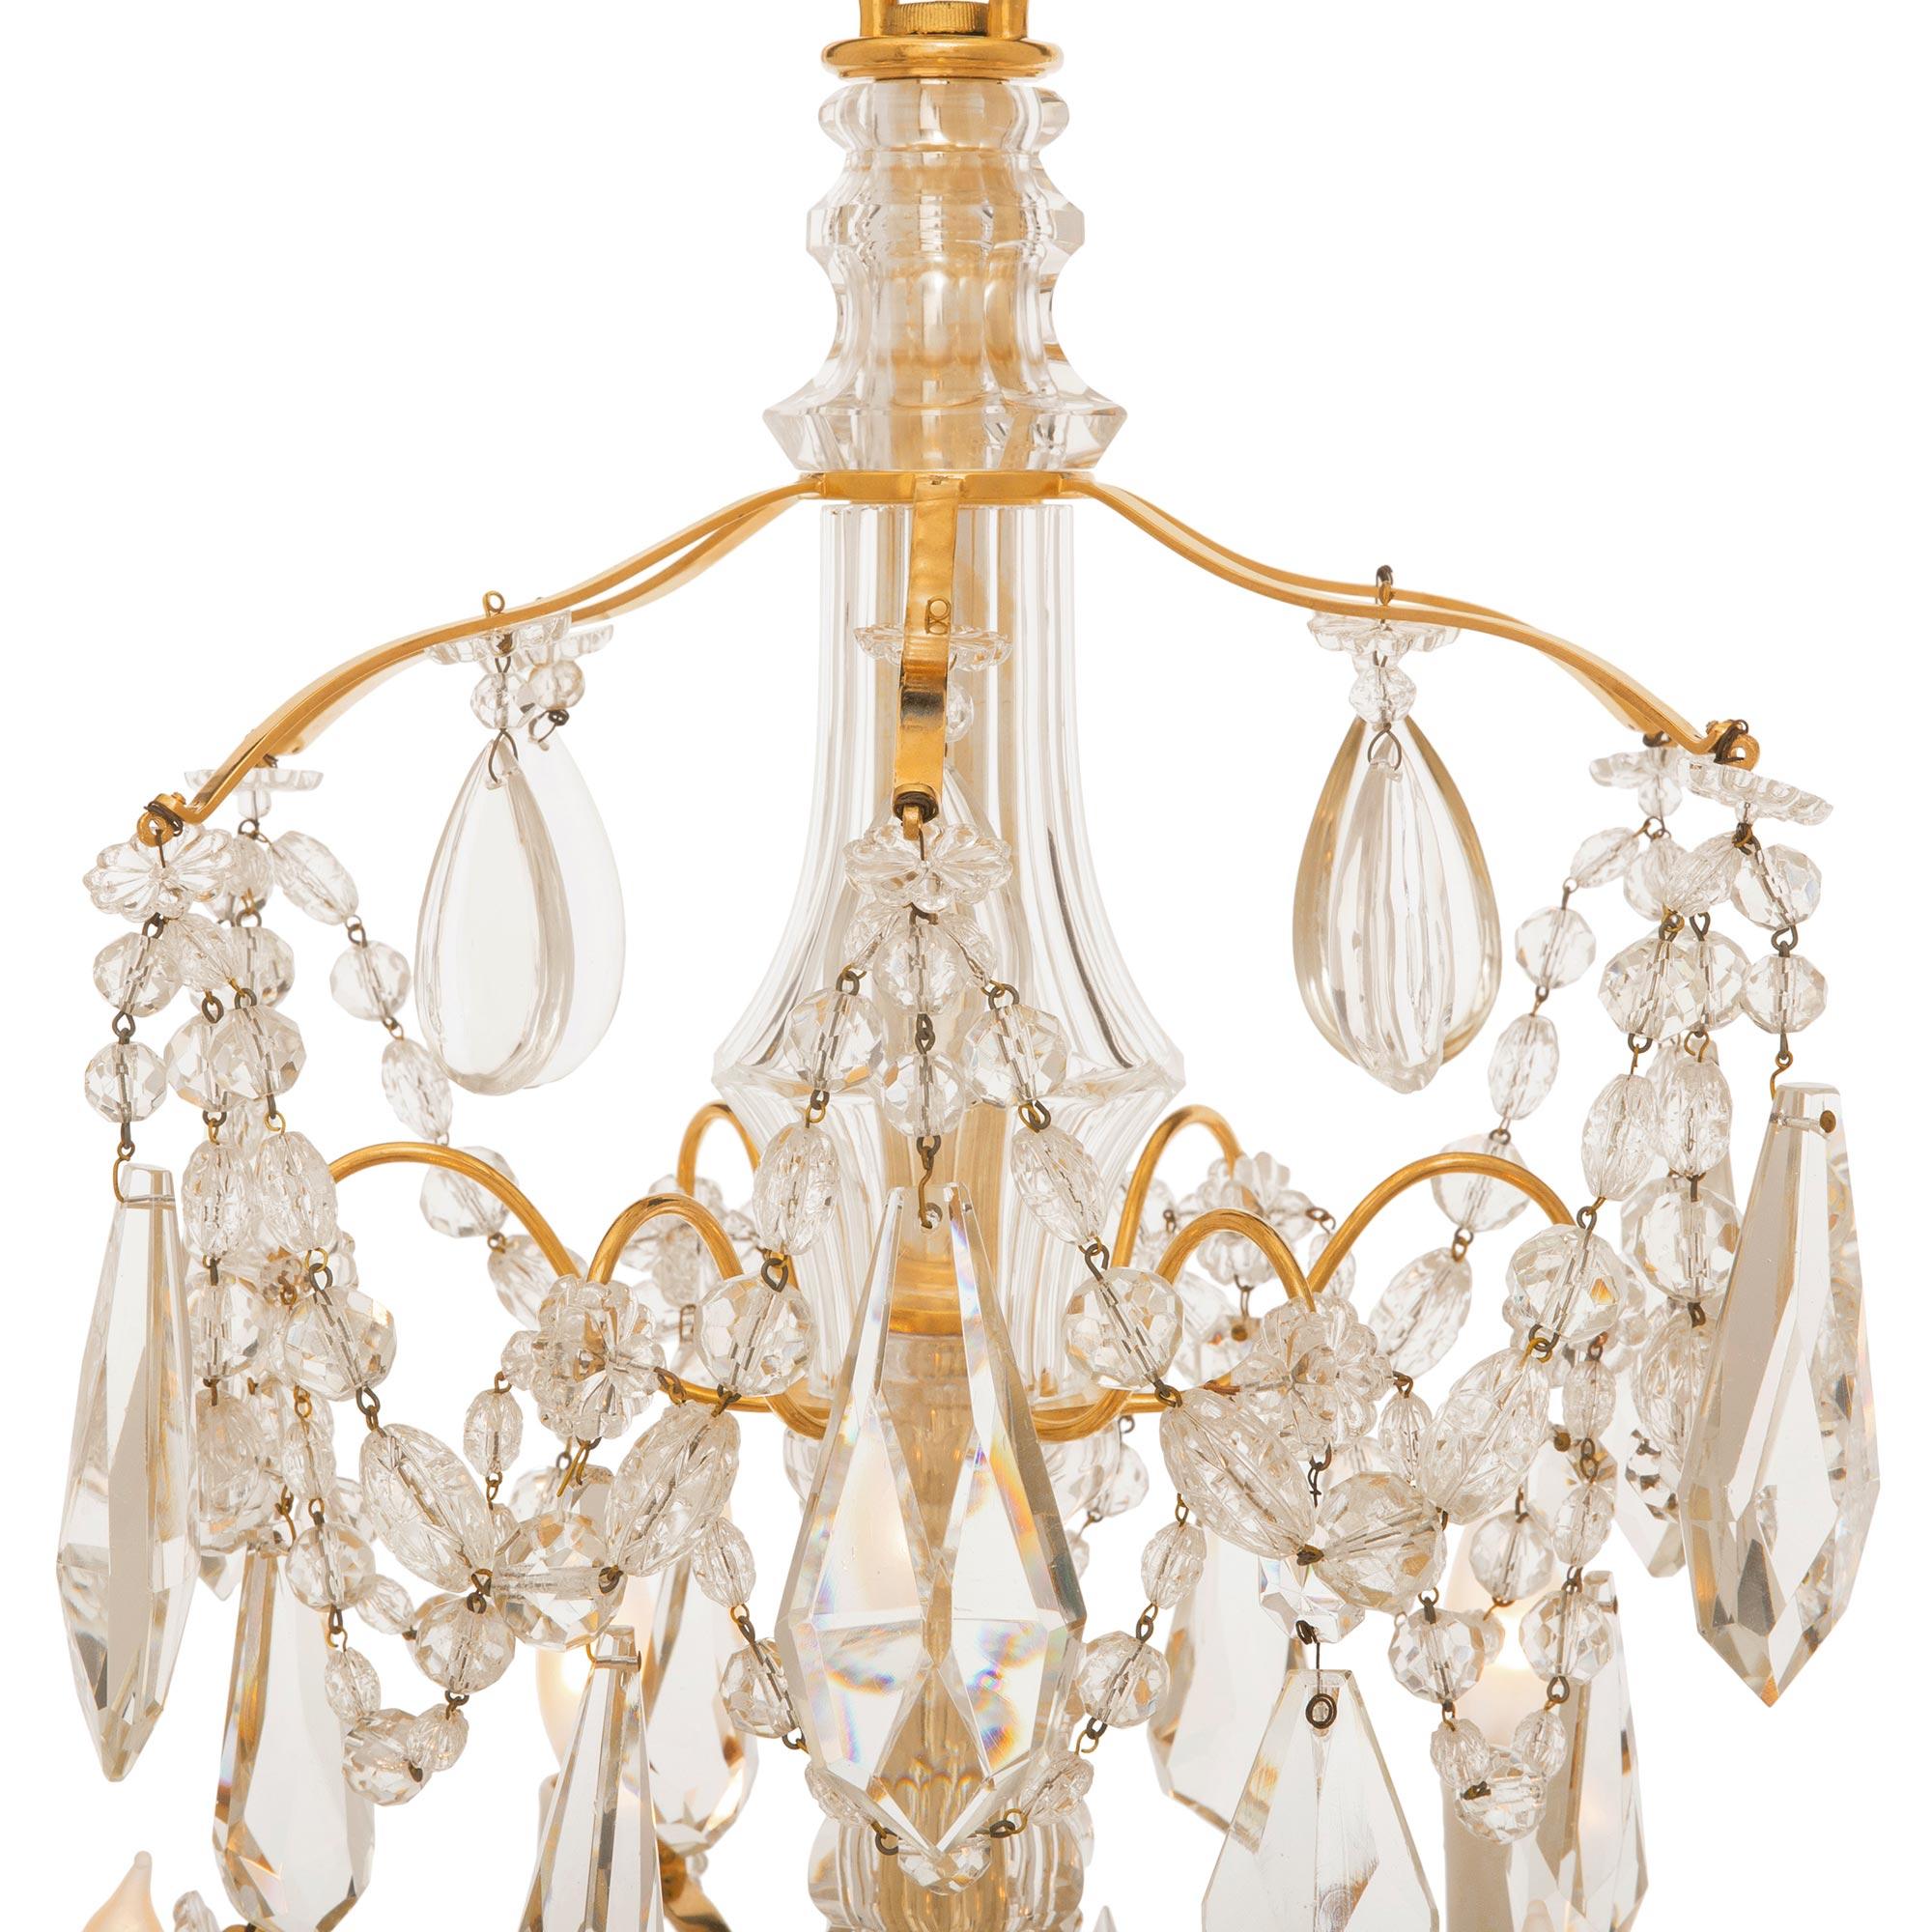 A beautiful French 19th century Louis XVI st. ormolu and Baccarat crystal chandelier. The twelve arm, fourteen light chandelier is centered by a striking facetted bottom crystal ball below a stunning array of exquisite kite and prism shaped cut